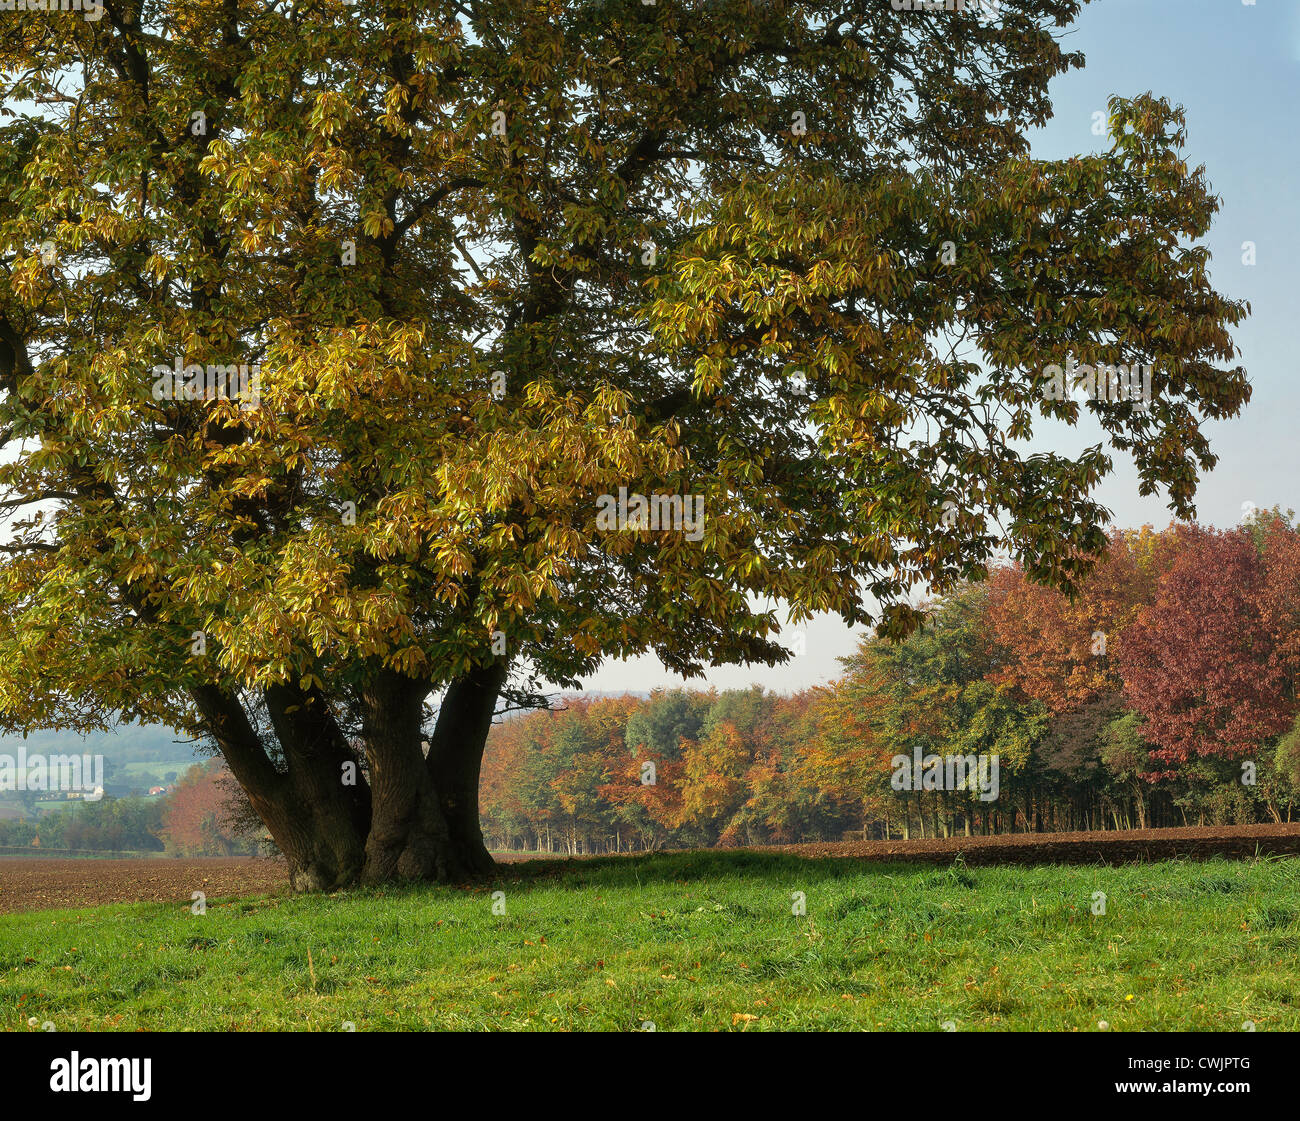 SWEET CHESTNUT TREE IN AUTUMN WYE VALLEY WITH TREES IN AUTUMN COLOURS Stock Photo